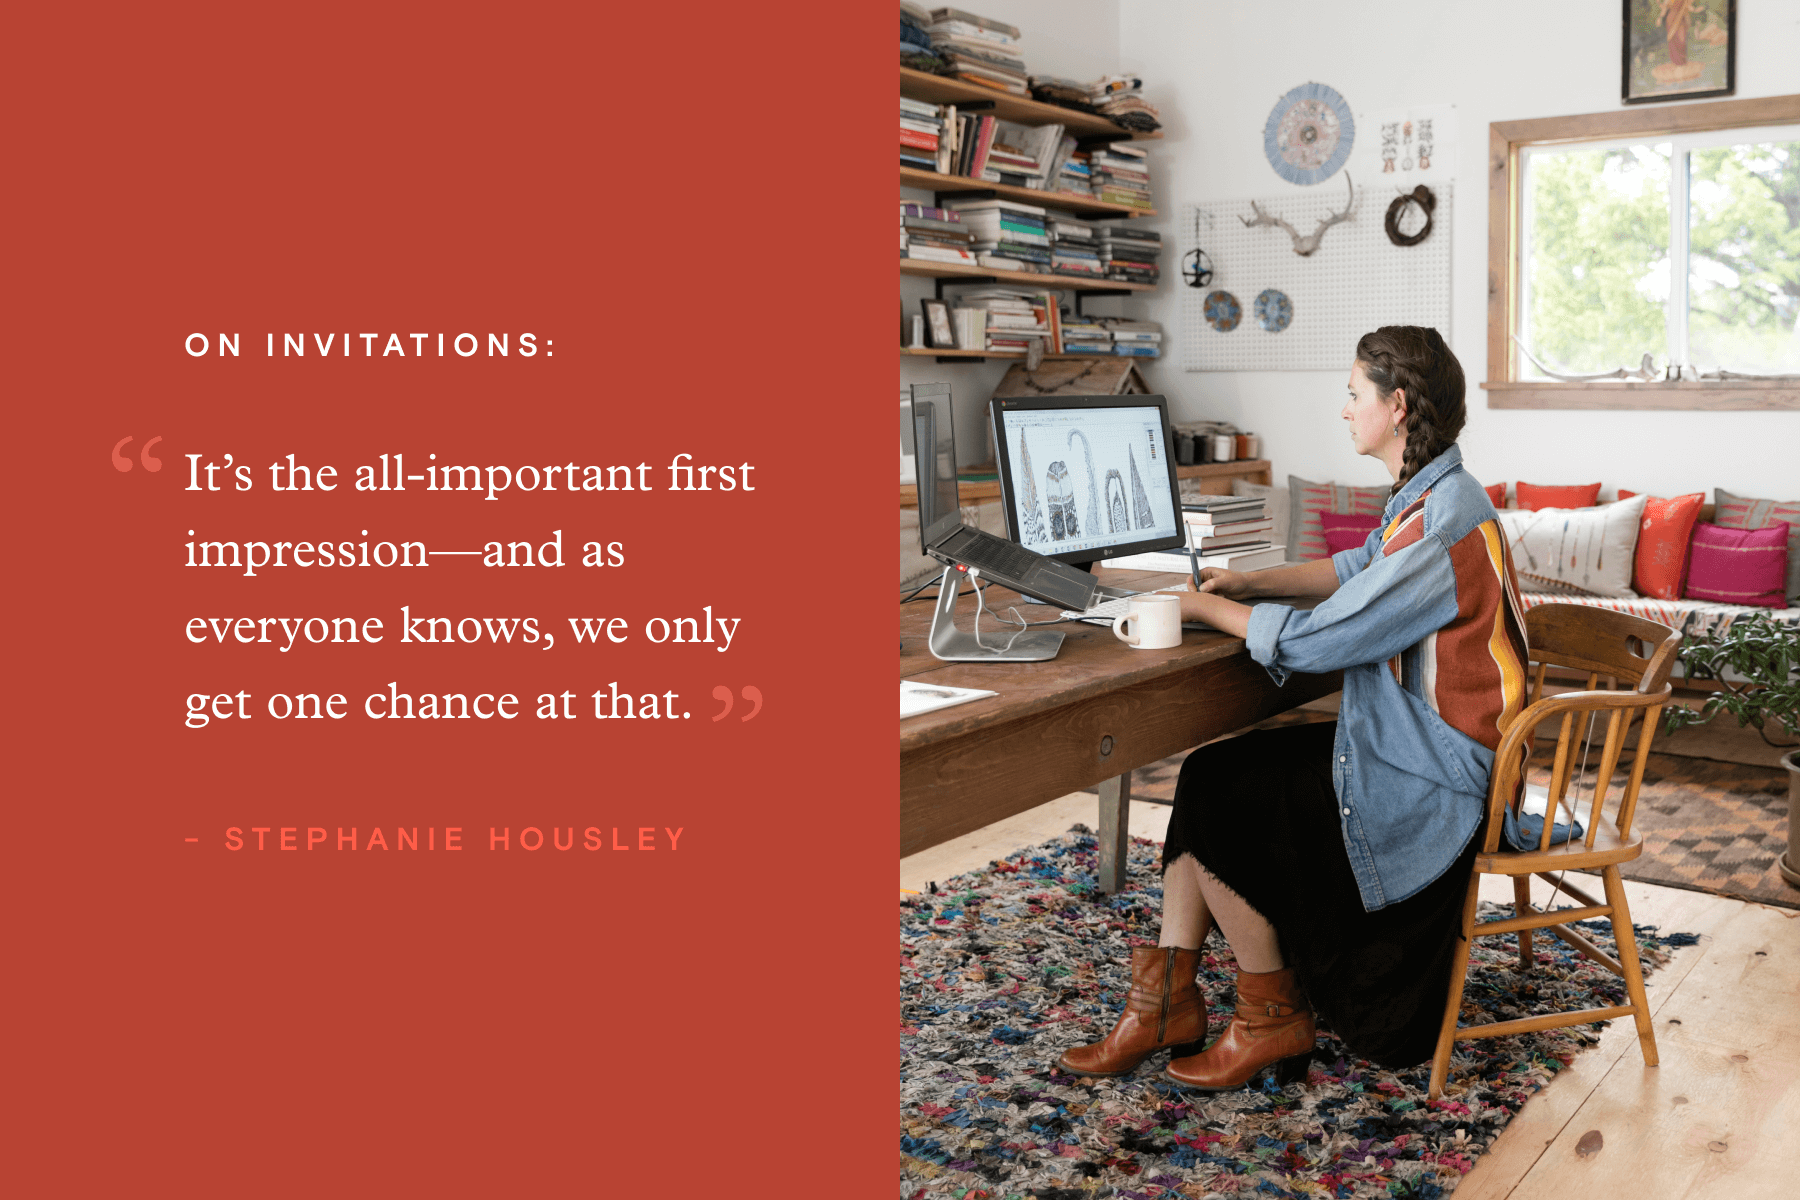 Right: Pull quote from Stephanie Housley’s interview that reads “It’s the all-important first impression—and as everyone know,s we only get one chance at that.” Left: Stephanie at work in her studio.